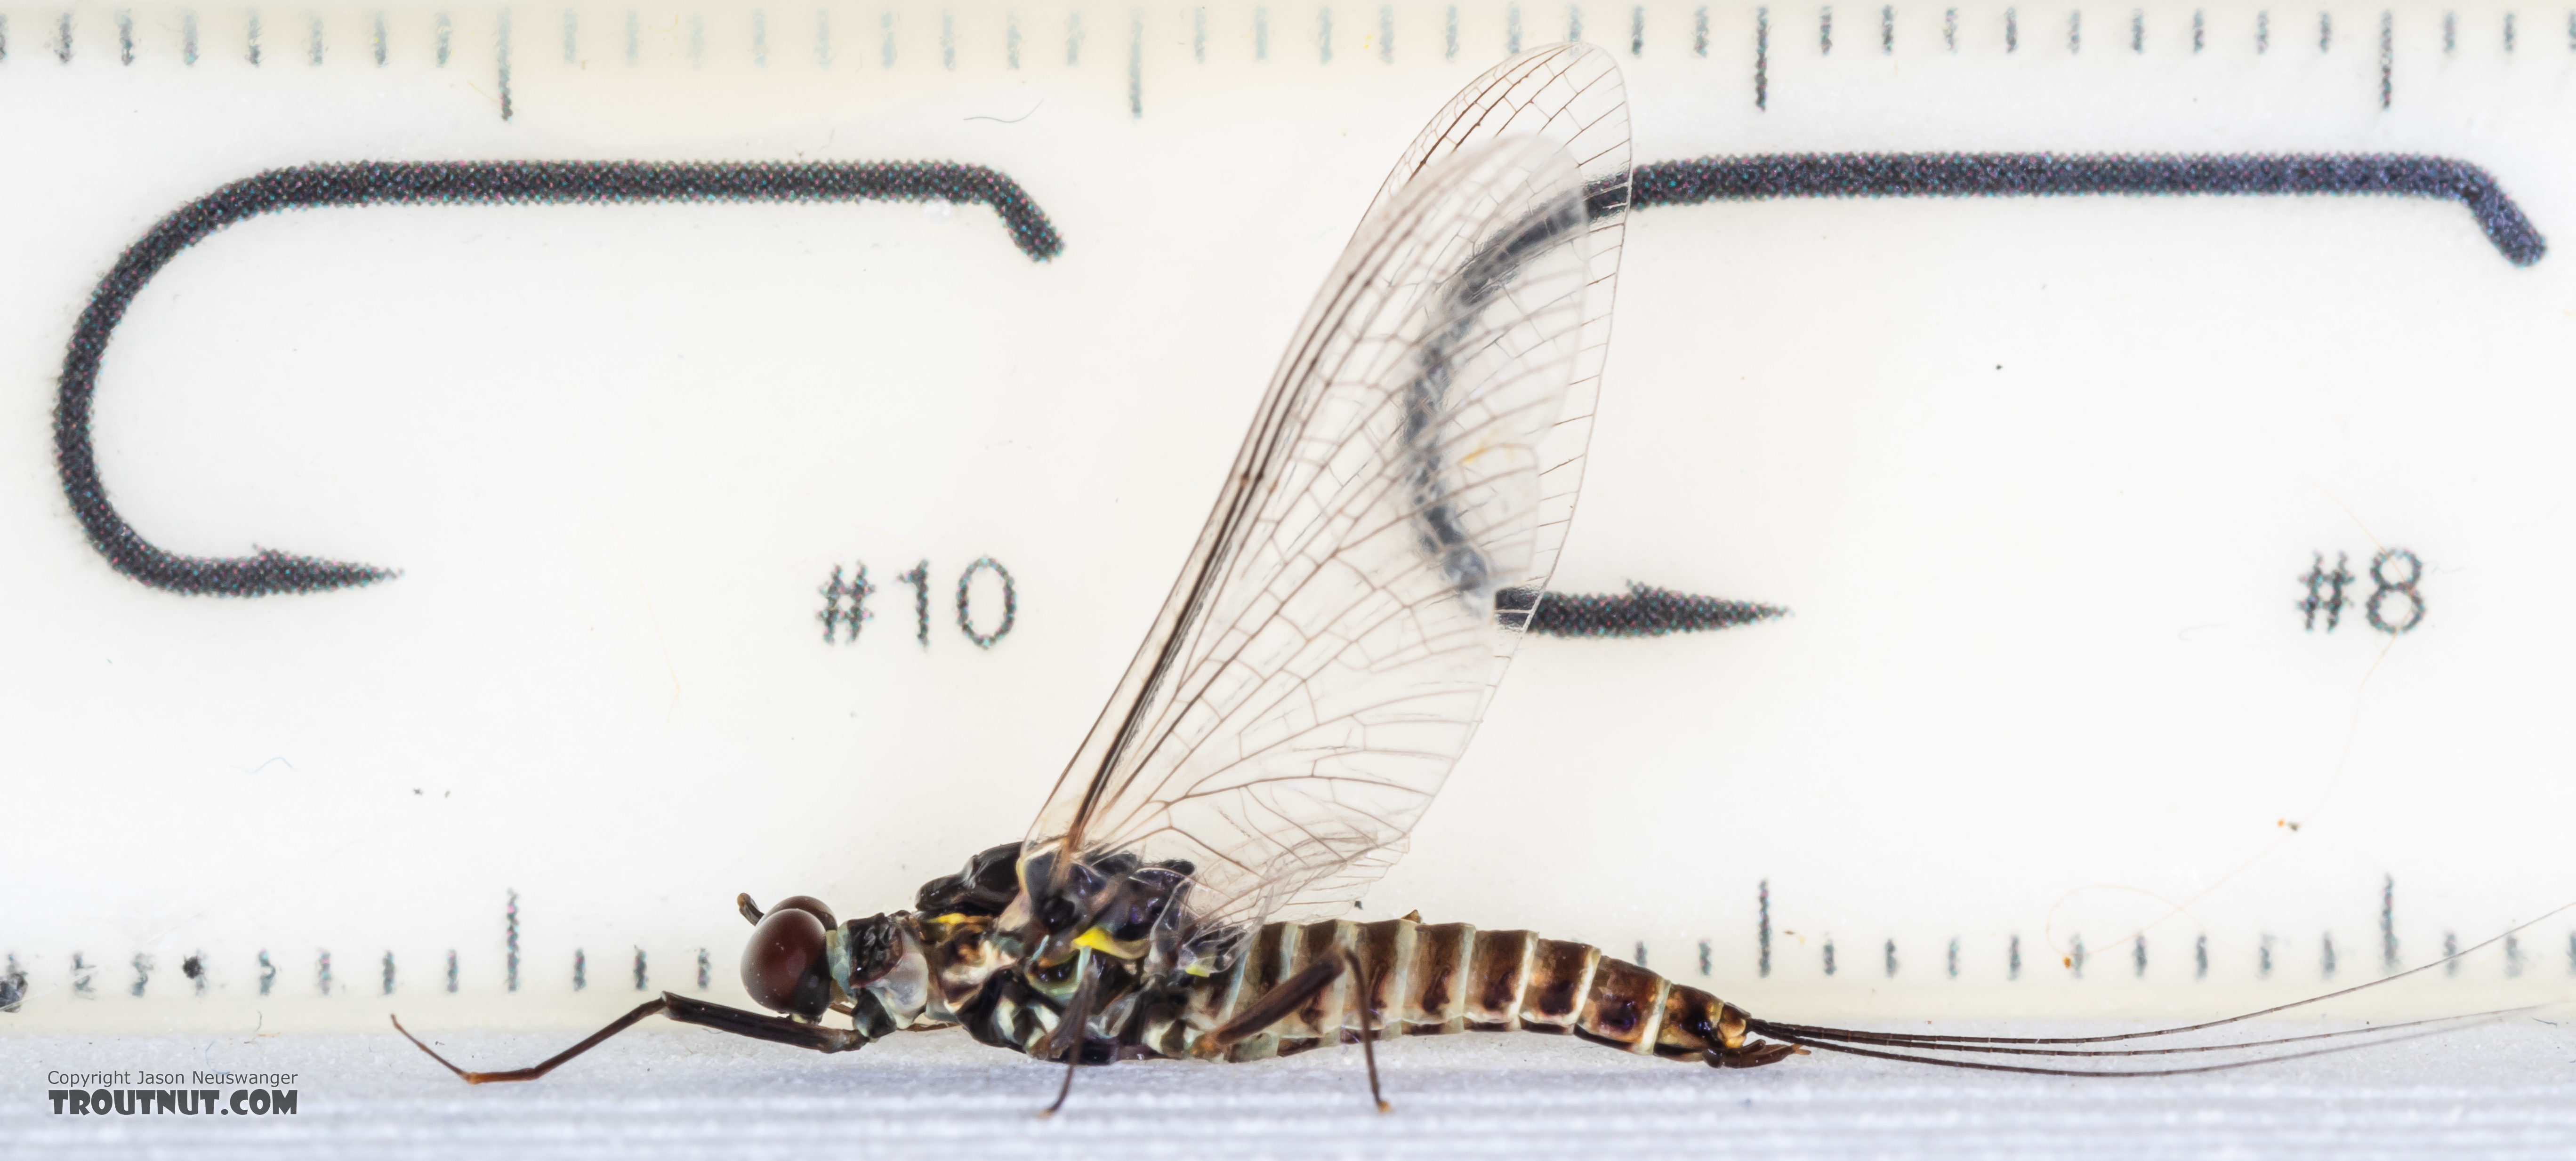 Male Drunella coloradensis (Small Western Green Drake) Mayfly Spinner from Mystery Creek #199 in Washington